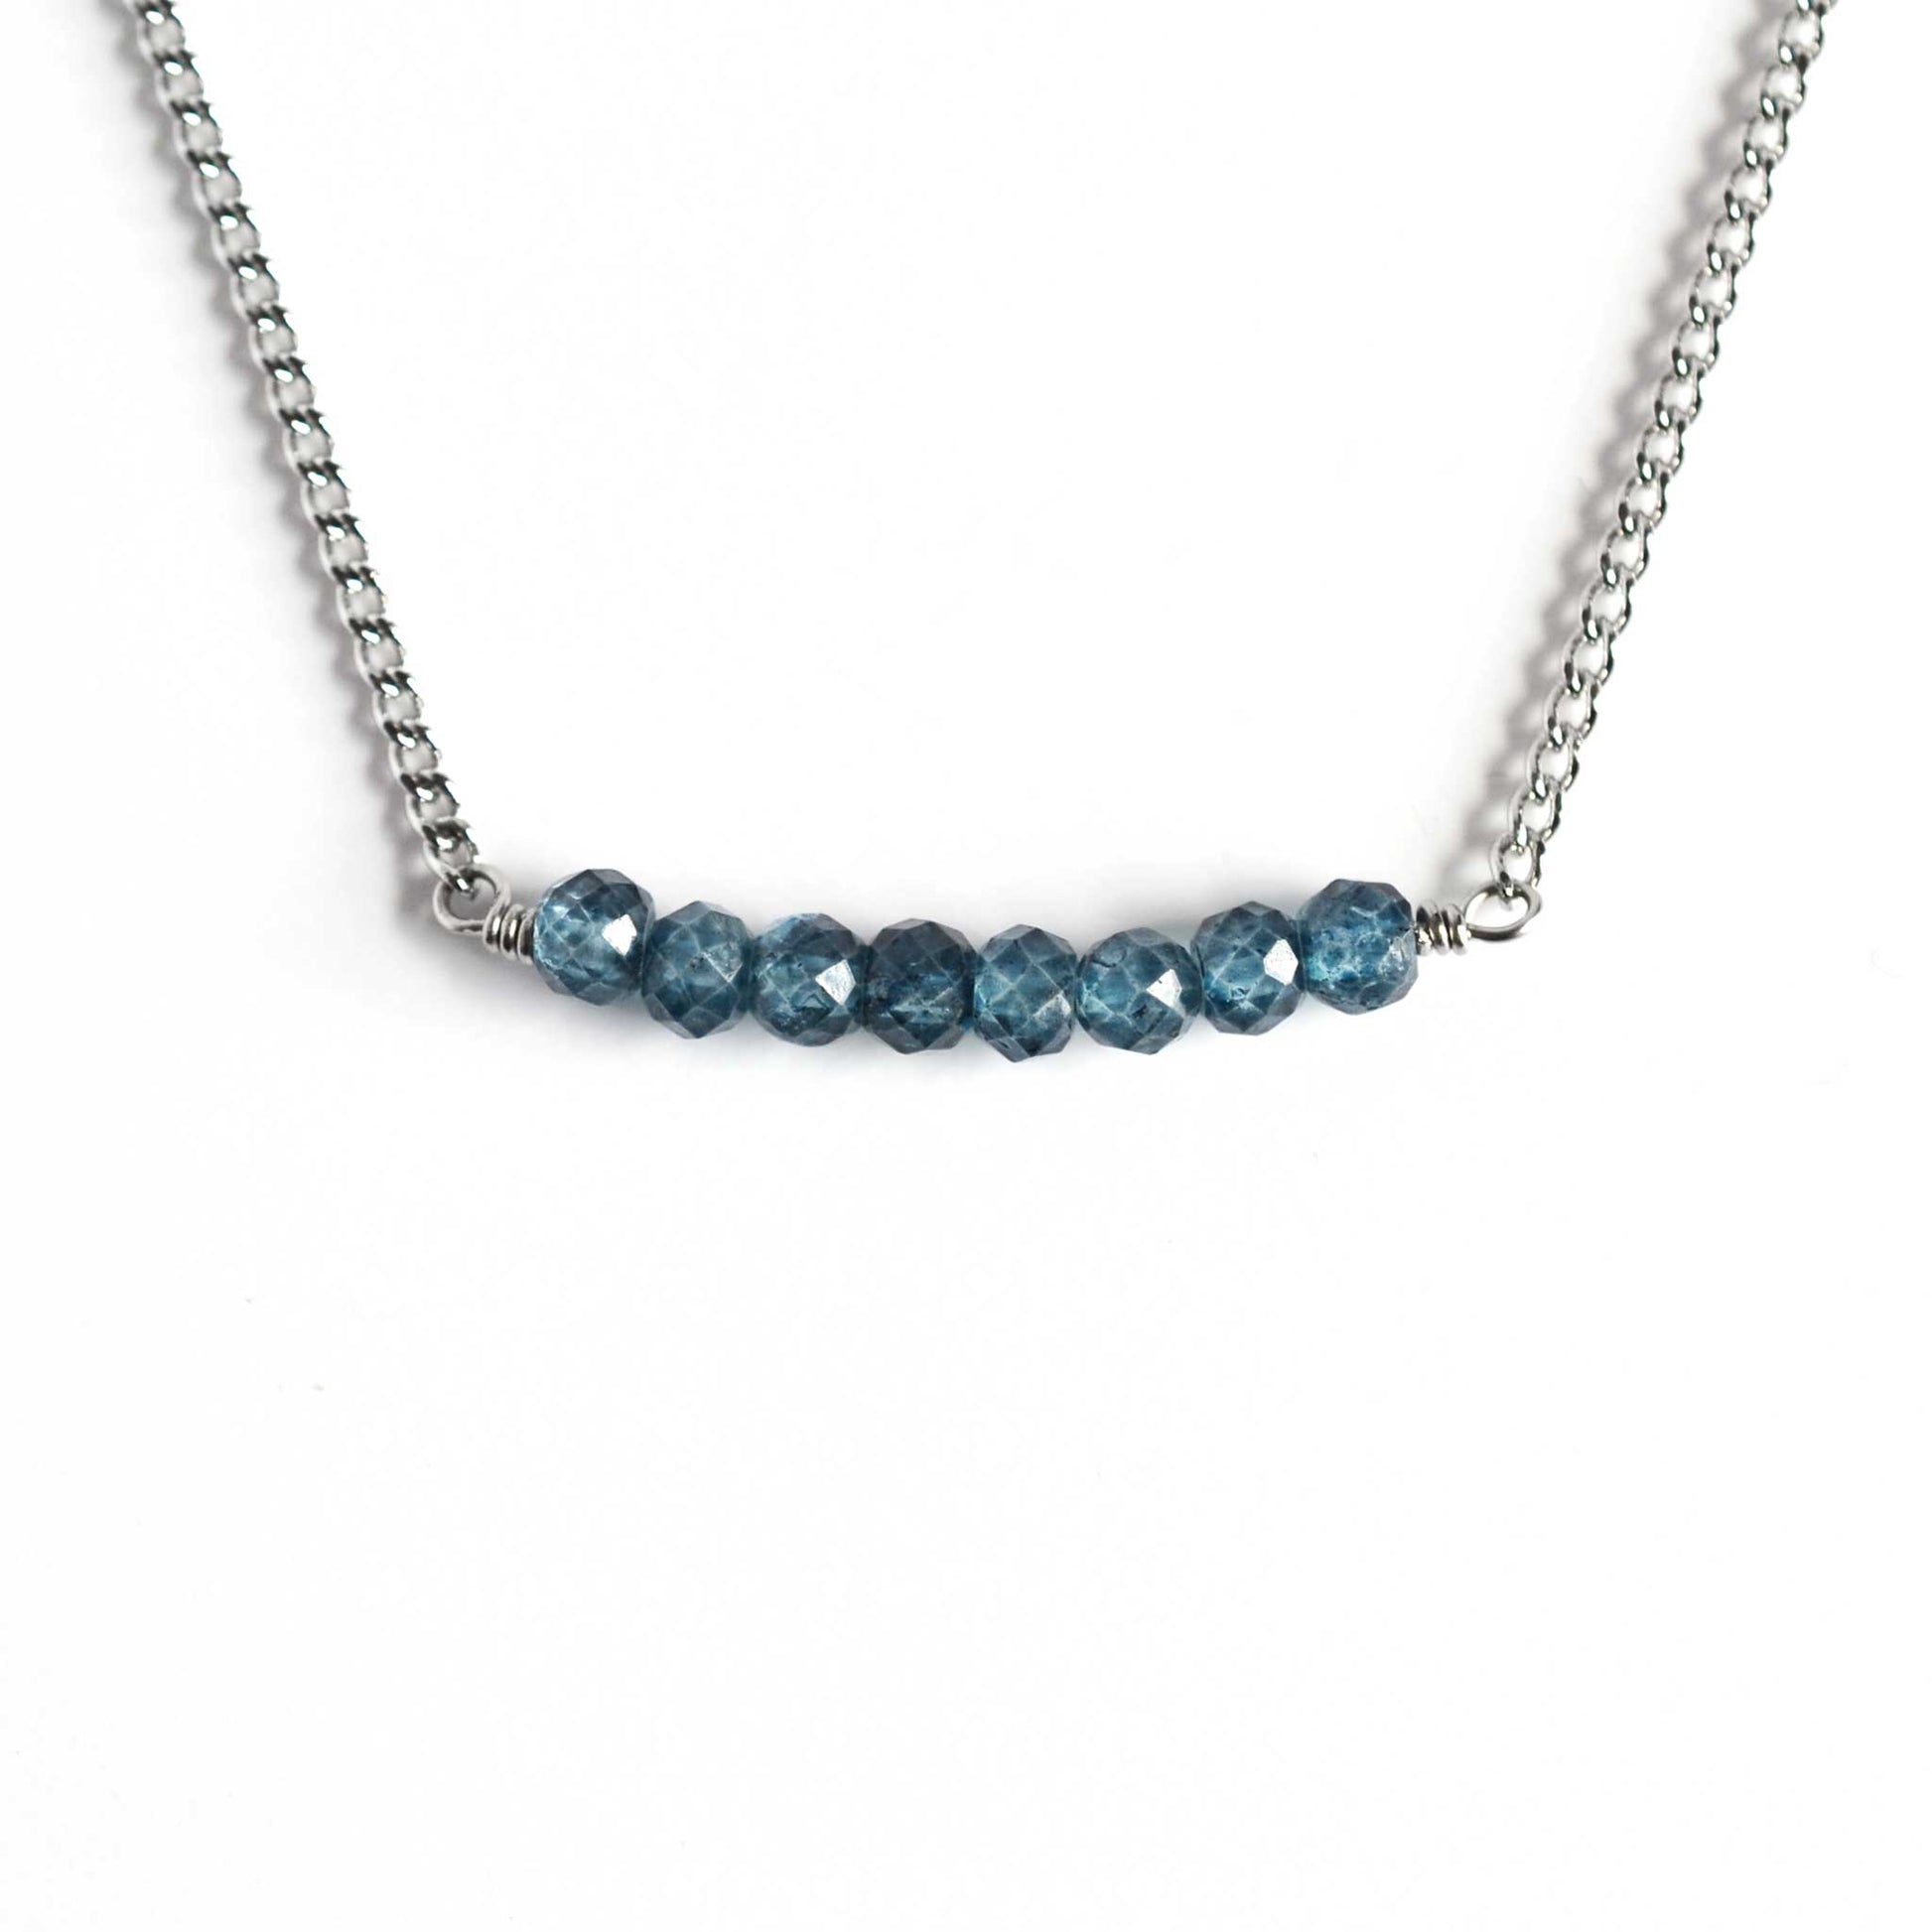 Dainty blue Topaz necklace on hypoallergenic stainless steel chain